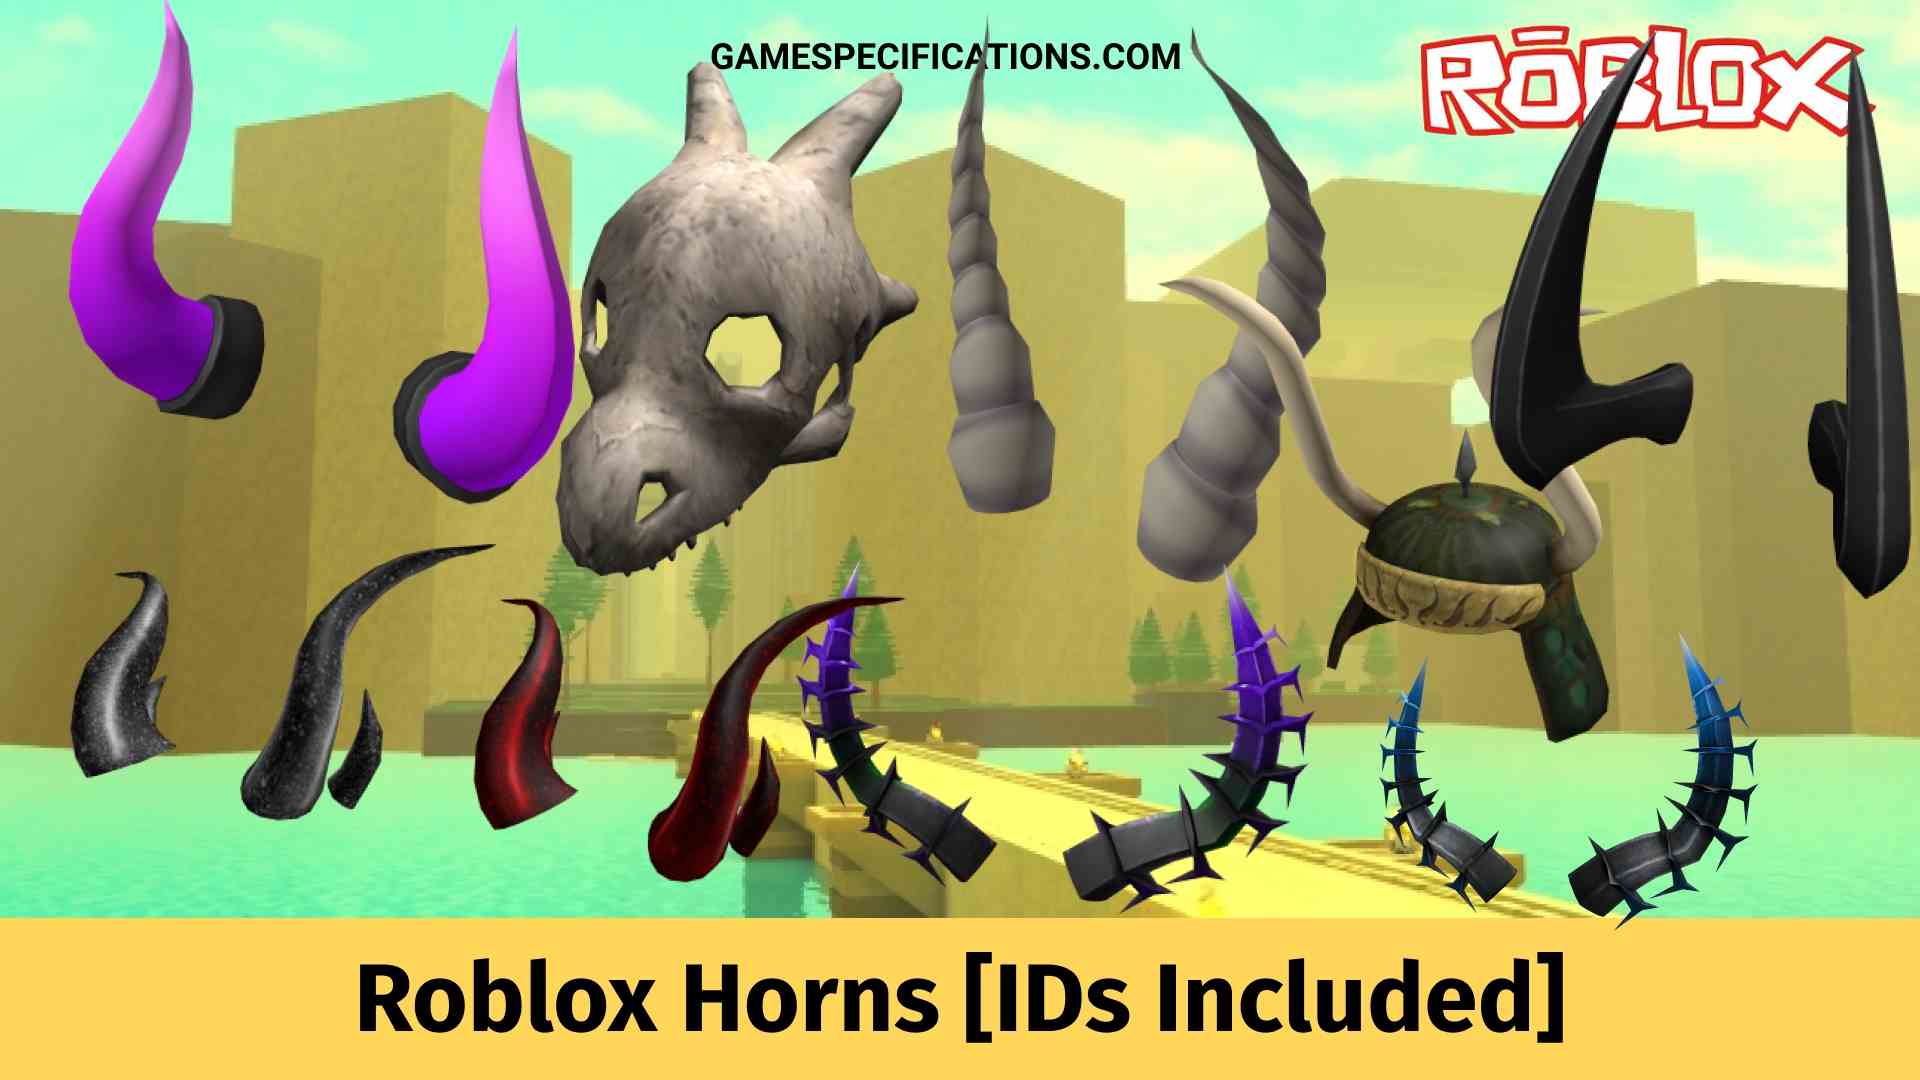 23 Roblox Horns To Awesome Devilish Look Ids Included Game Specifications - roblox ugc hats list